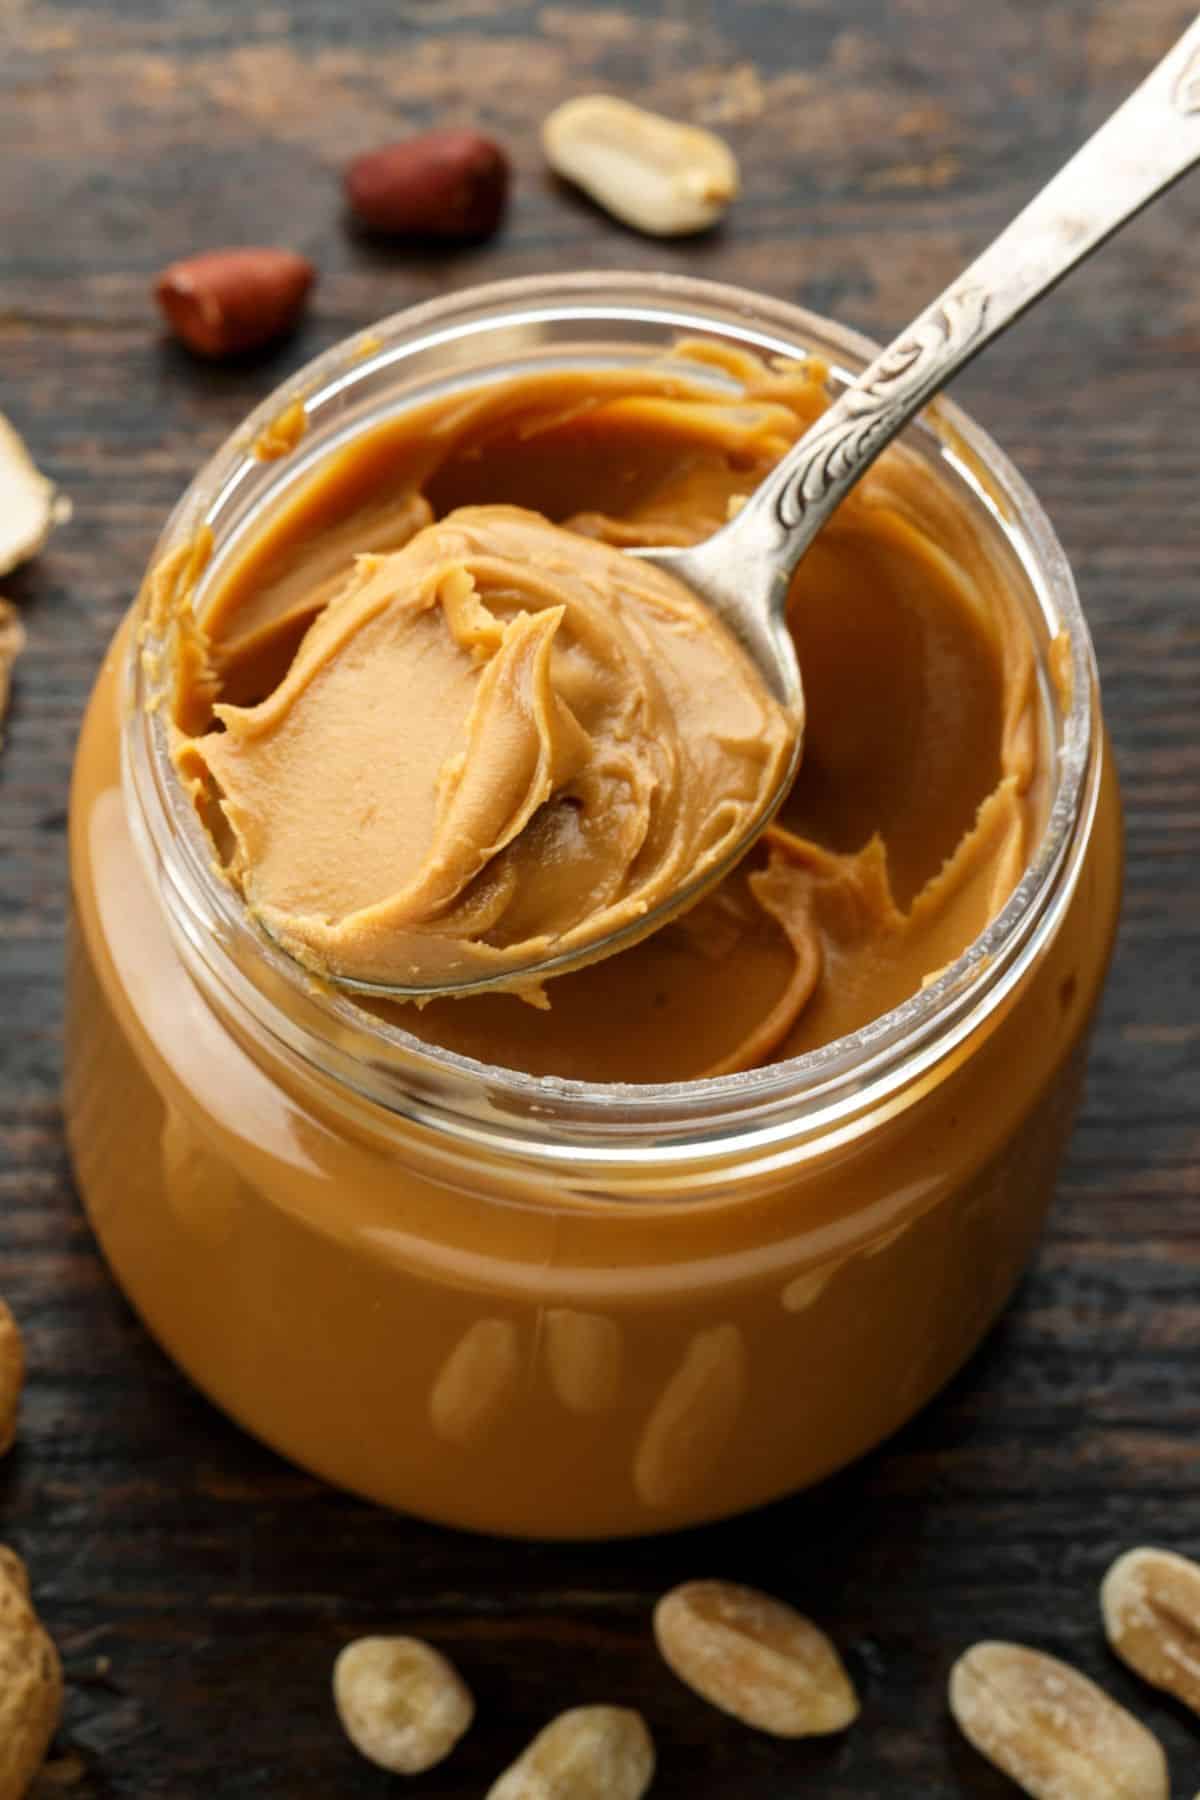 a spoon scooping a serving of peanut butter out of a jar.